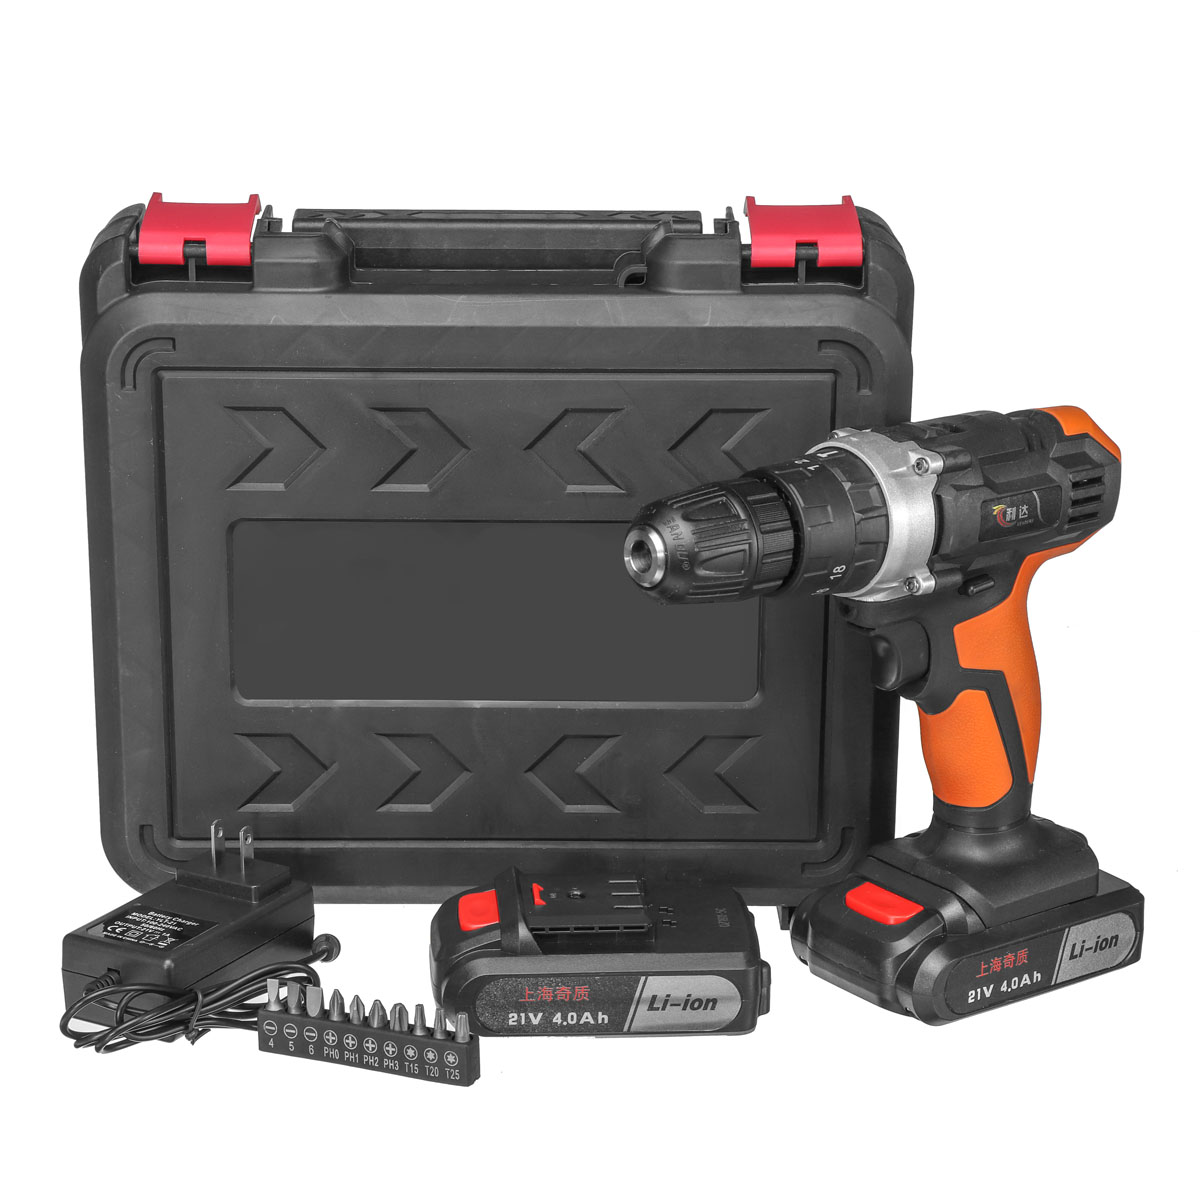 21V-4000mAh-Li-ion-Cordless-Electric-Impact-Drill-183-Clutches-2-Speed-Power-Drills-With-2-Batteries-1412172